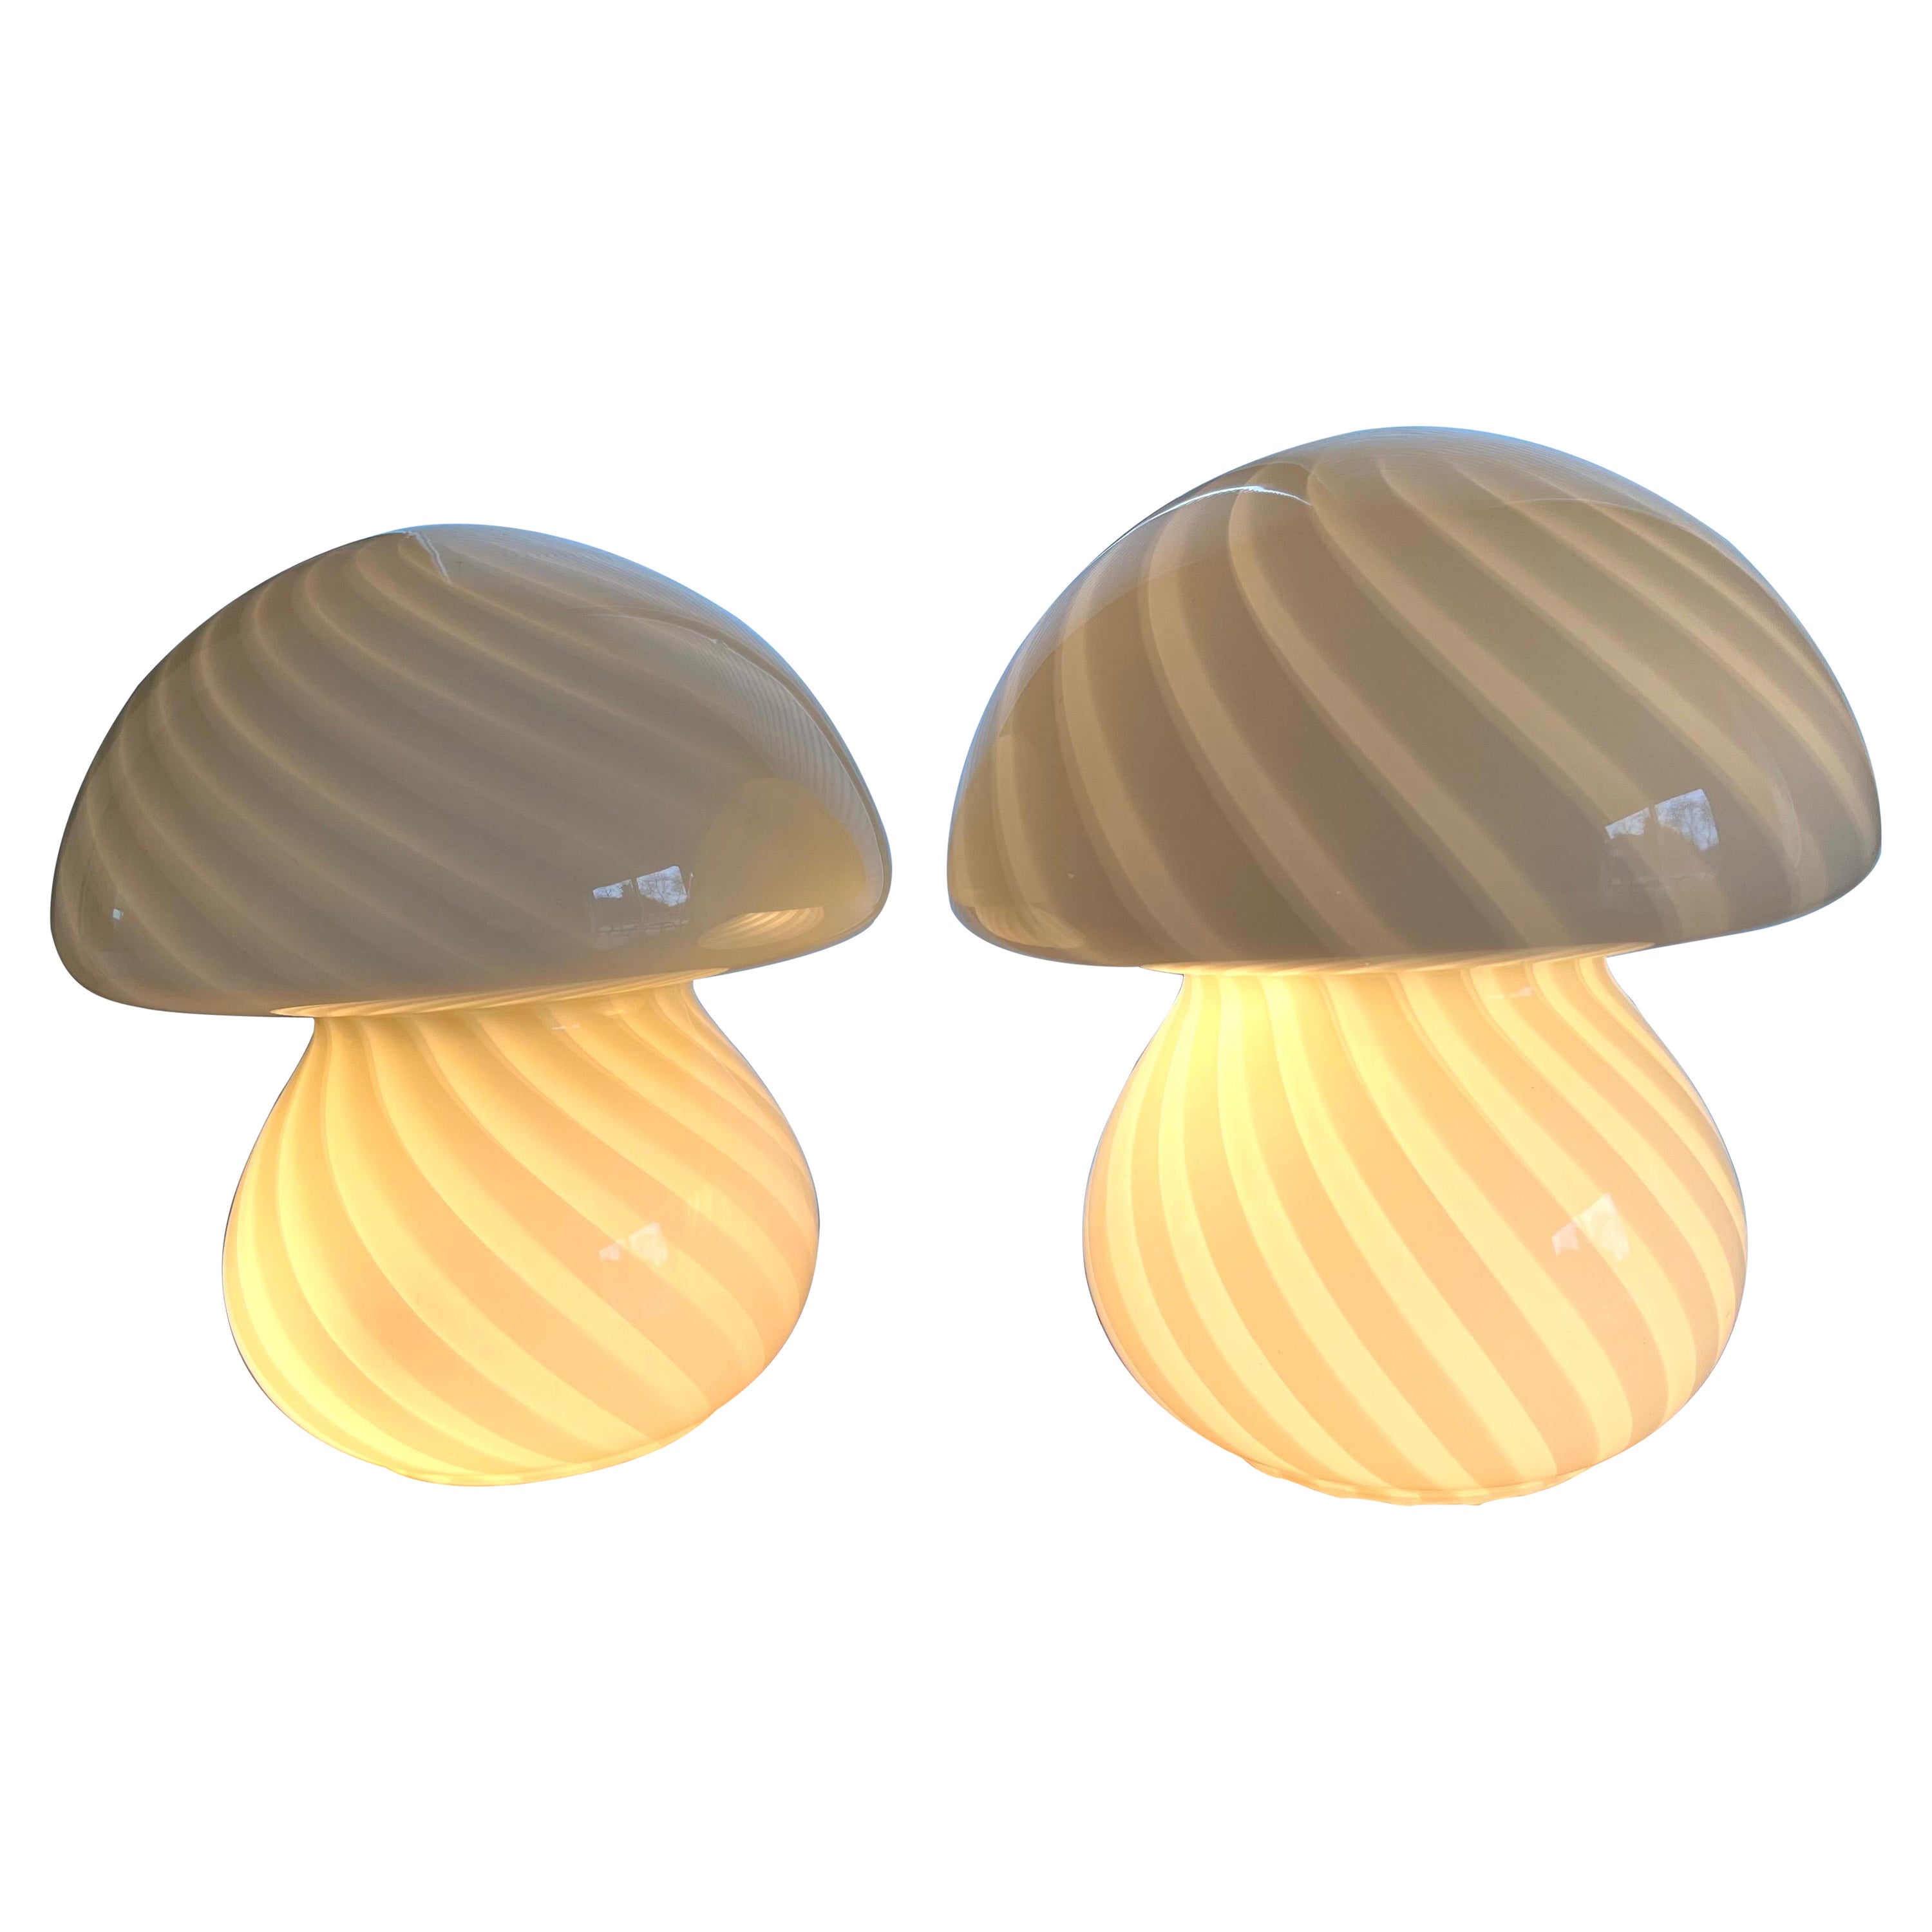 1970 Murano style Glass Mushroom Table Lamps - A Paie